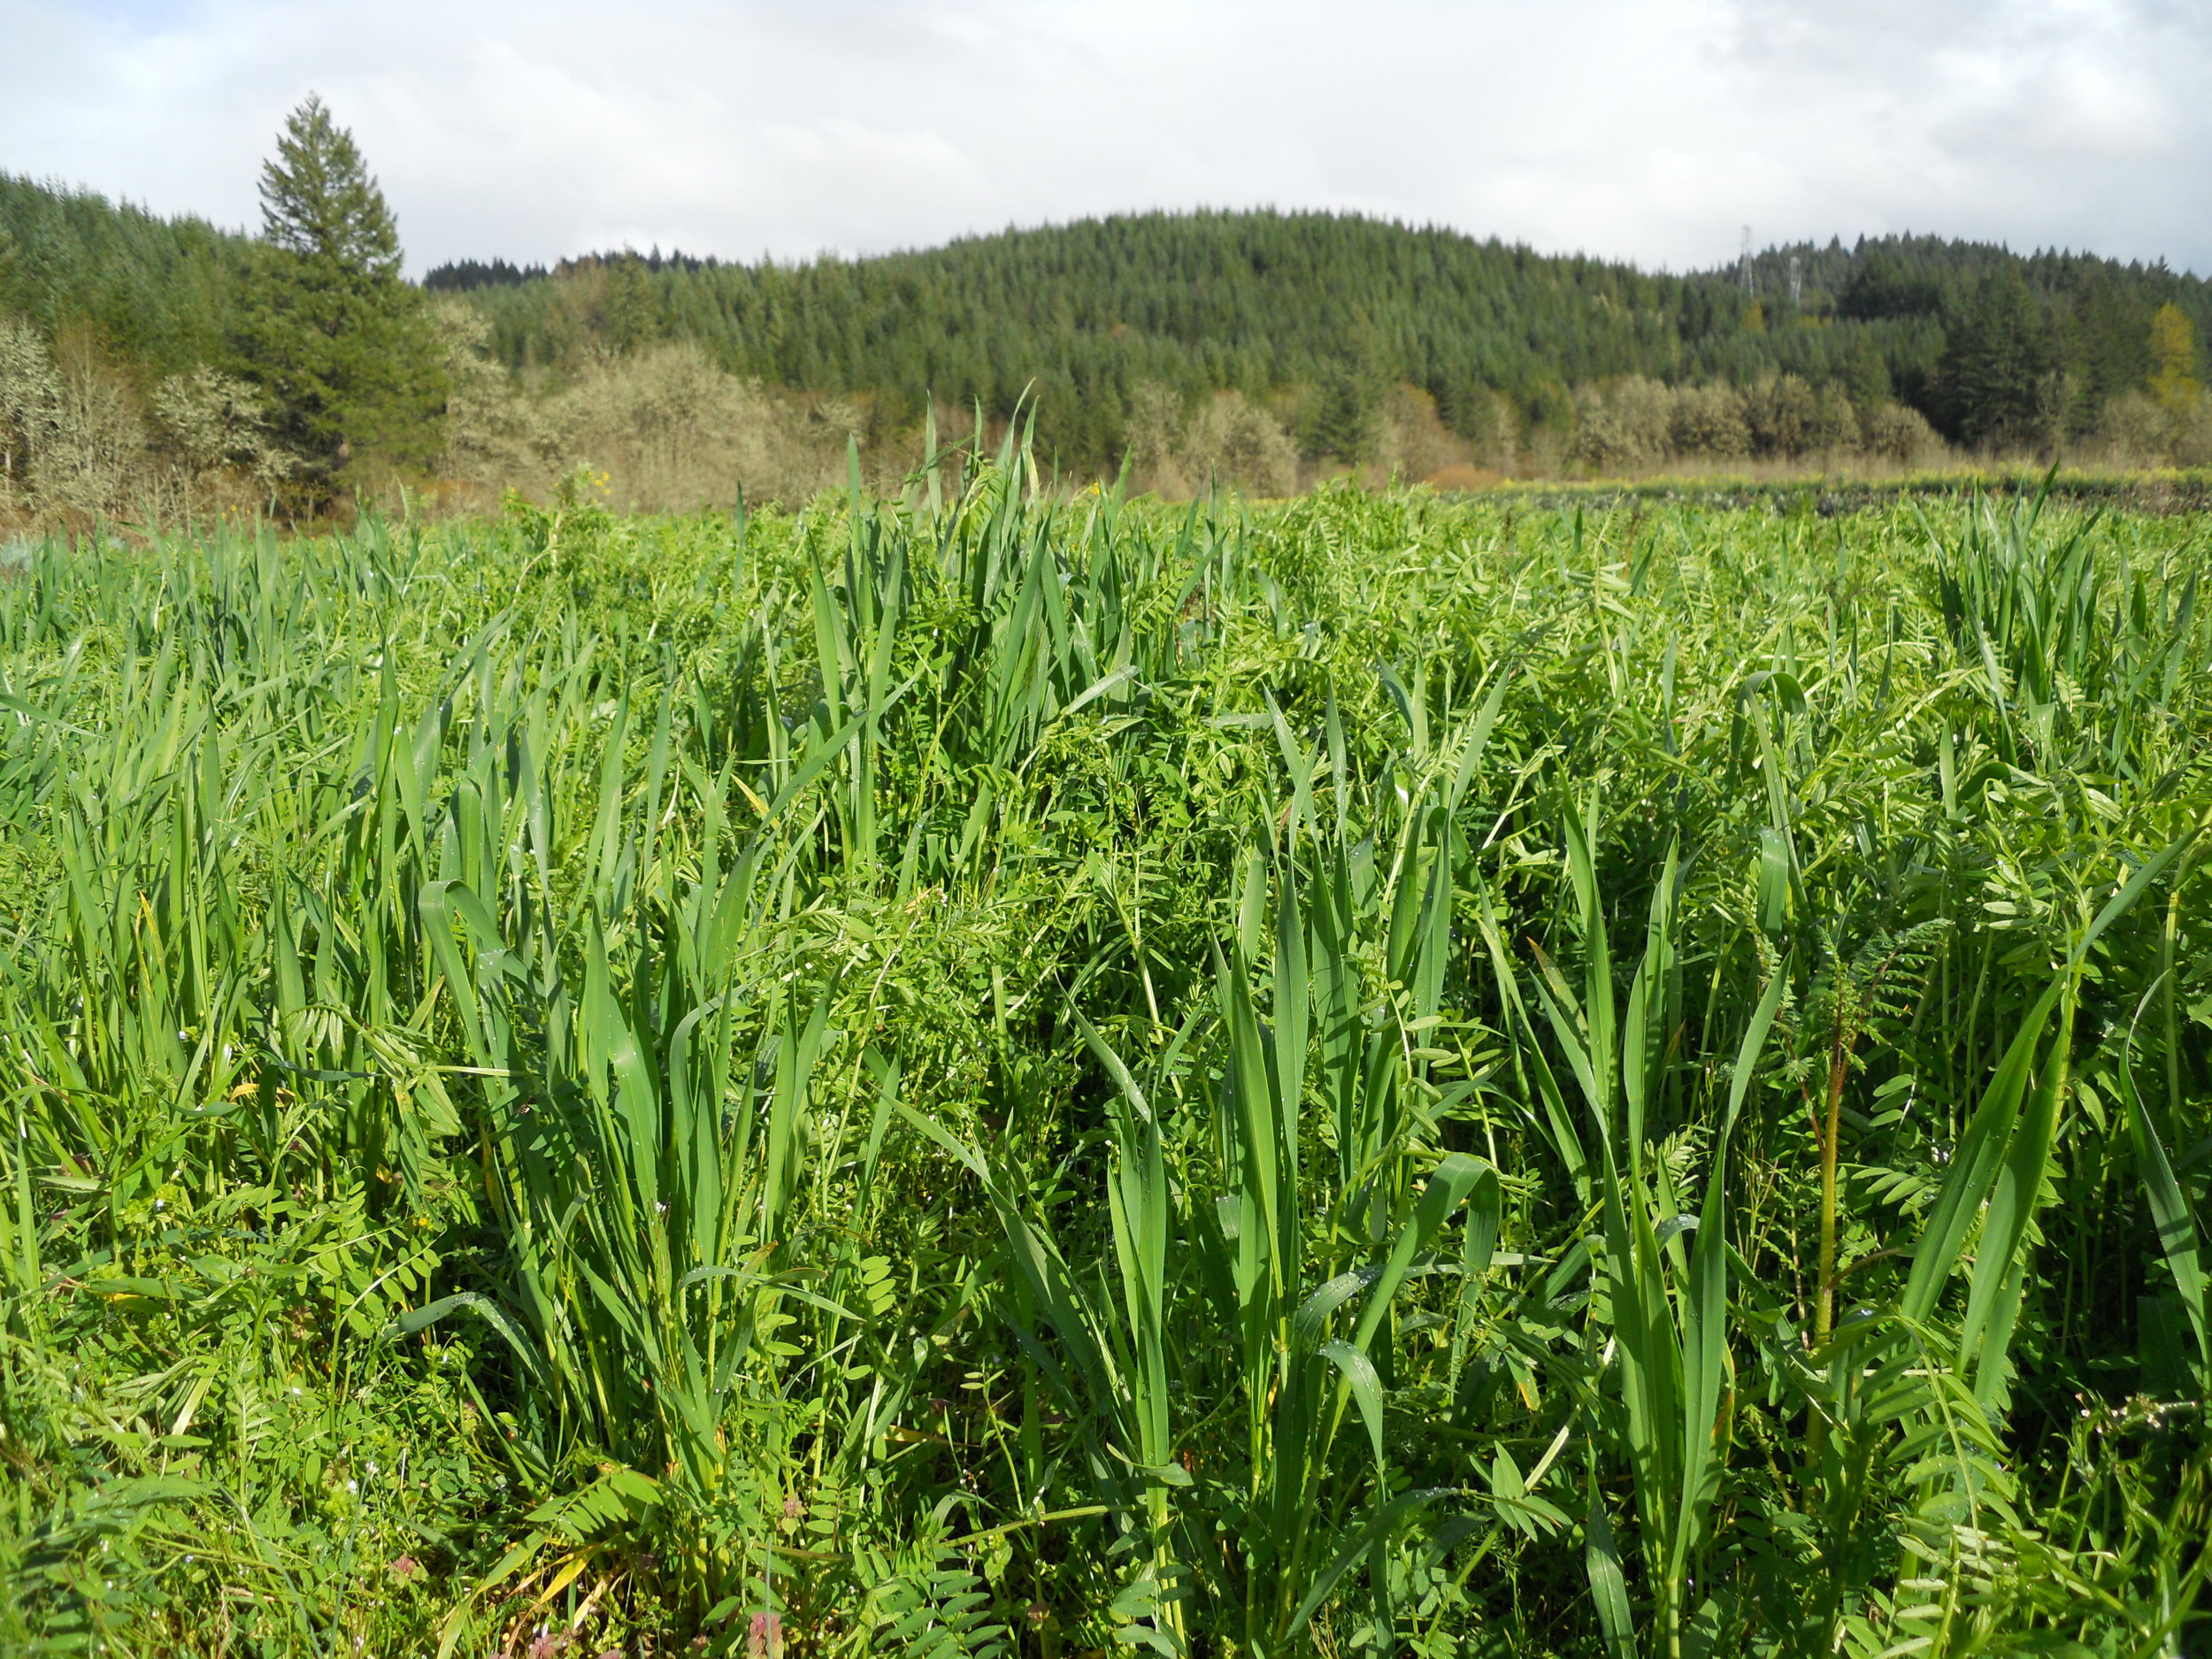  Growing a grass and a legume together in a cover crop mix enhances each plant's usefulness.&nbsp; The wheat and vetch compete, inspiring each plant to grow taller than it would alone, and the wheat provides a trellis for the vetch. 